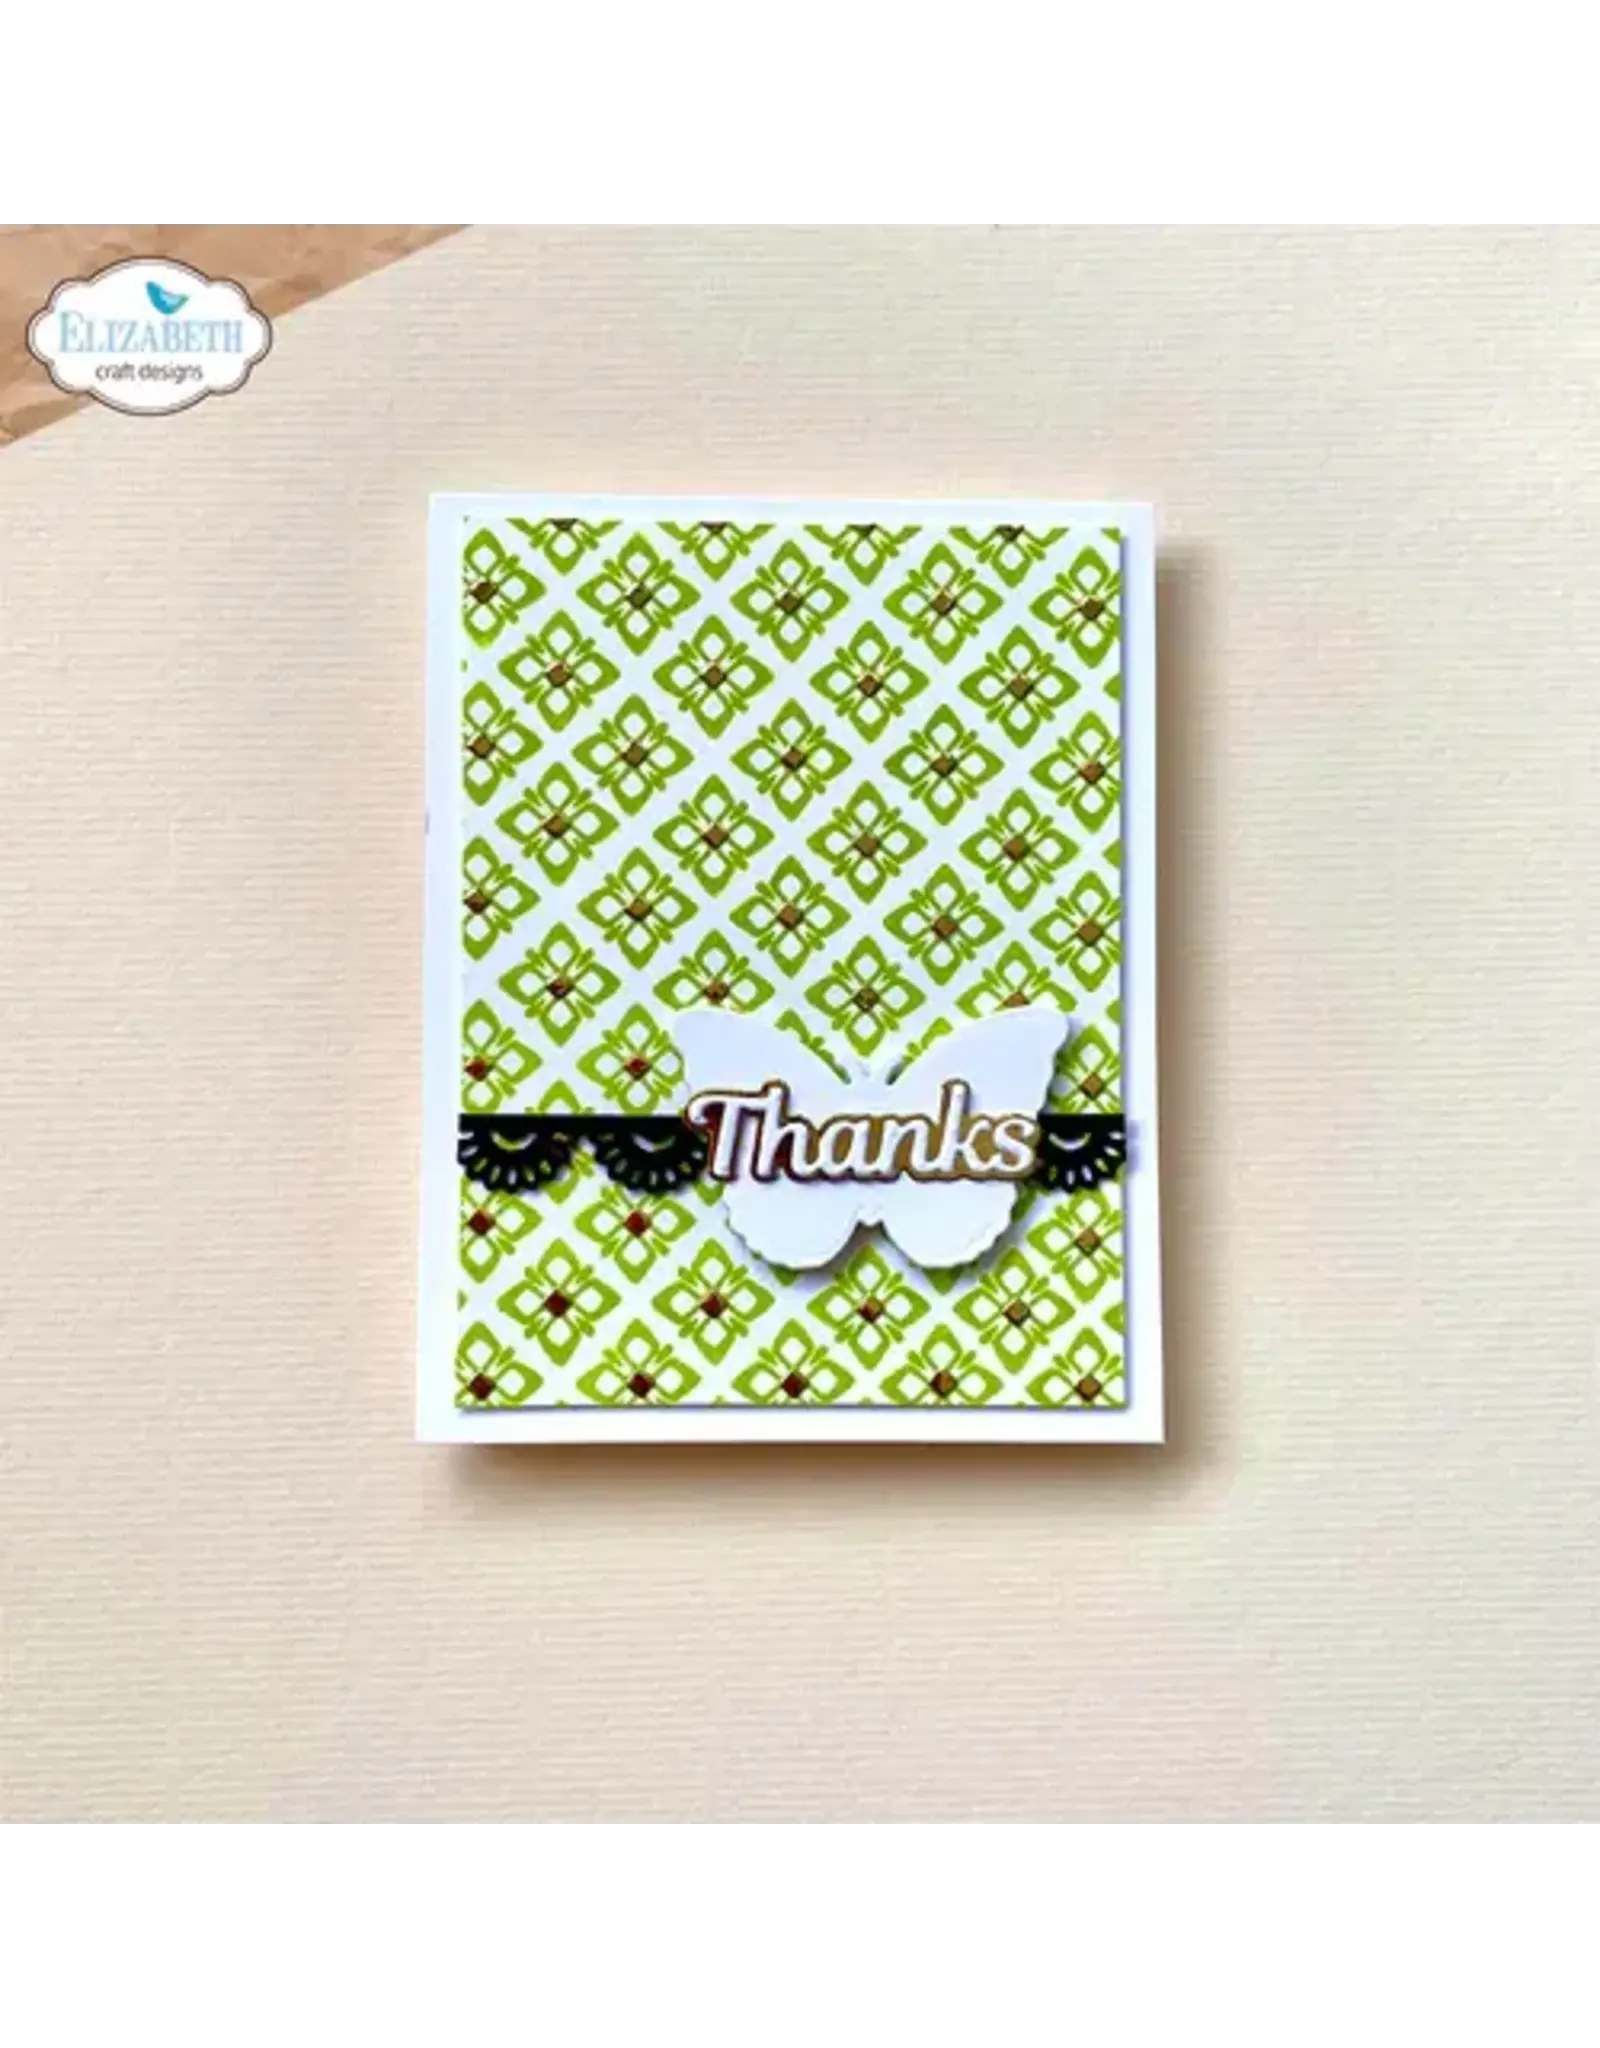 ELIZABETH CRAFT DESIGNS ELIZABETH CRAFT DESIGNS EVERYDAY ELEMENTS BY ANNETTE GREEN PHRASES & DINGBATS CLEAR STAMP SET